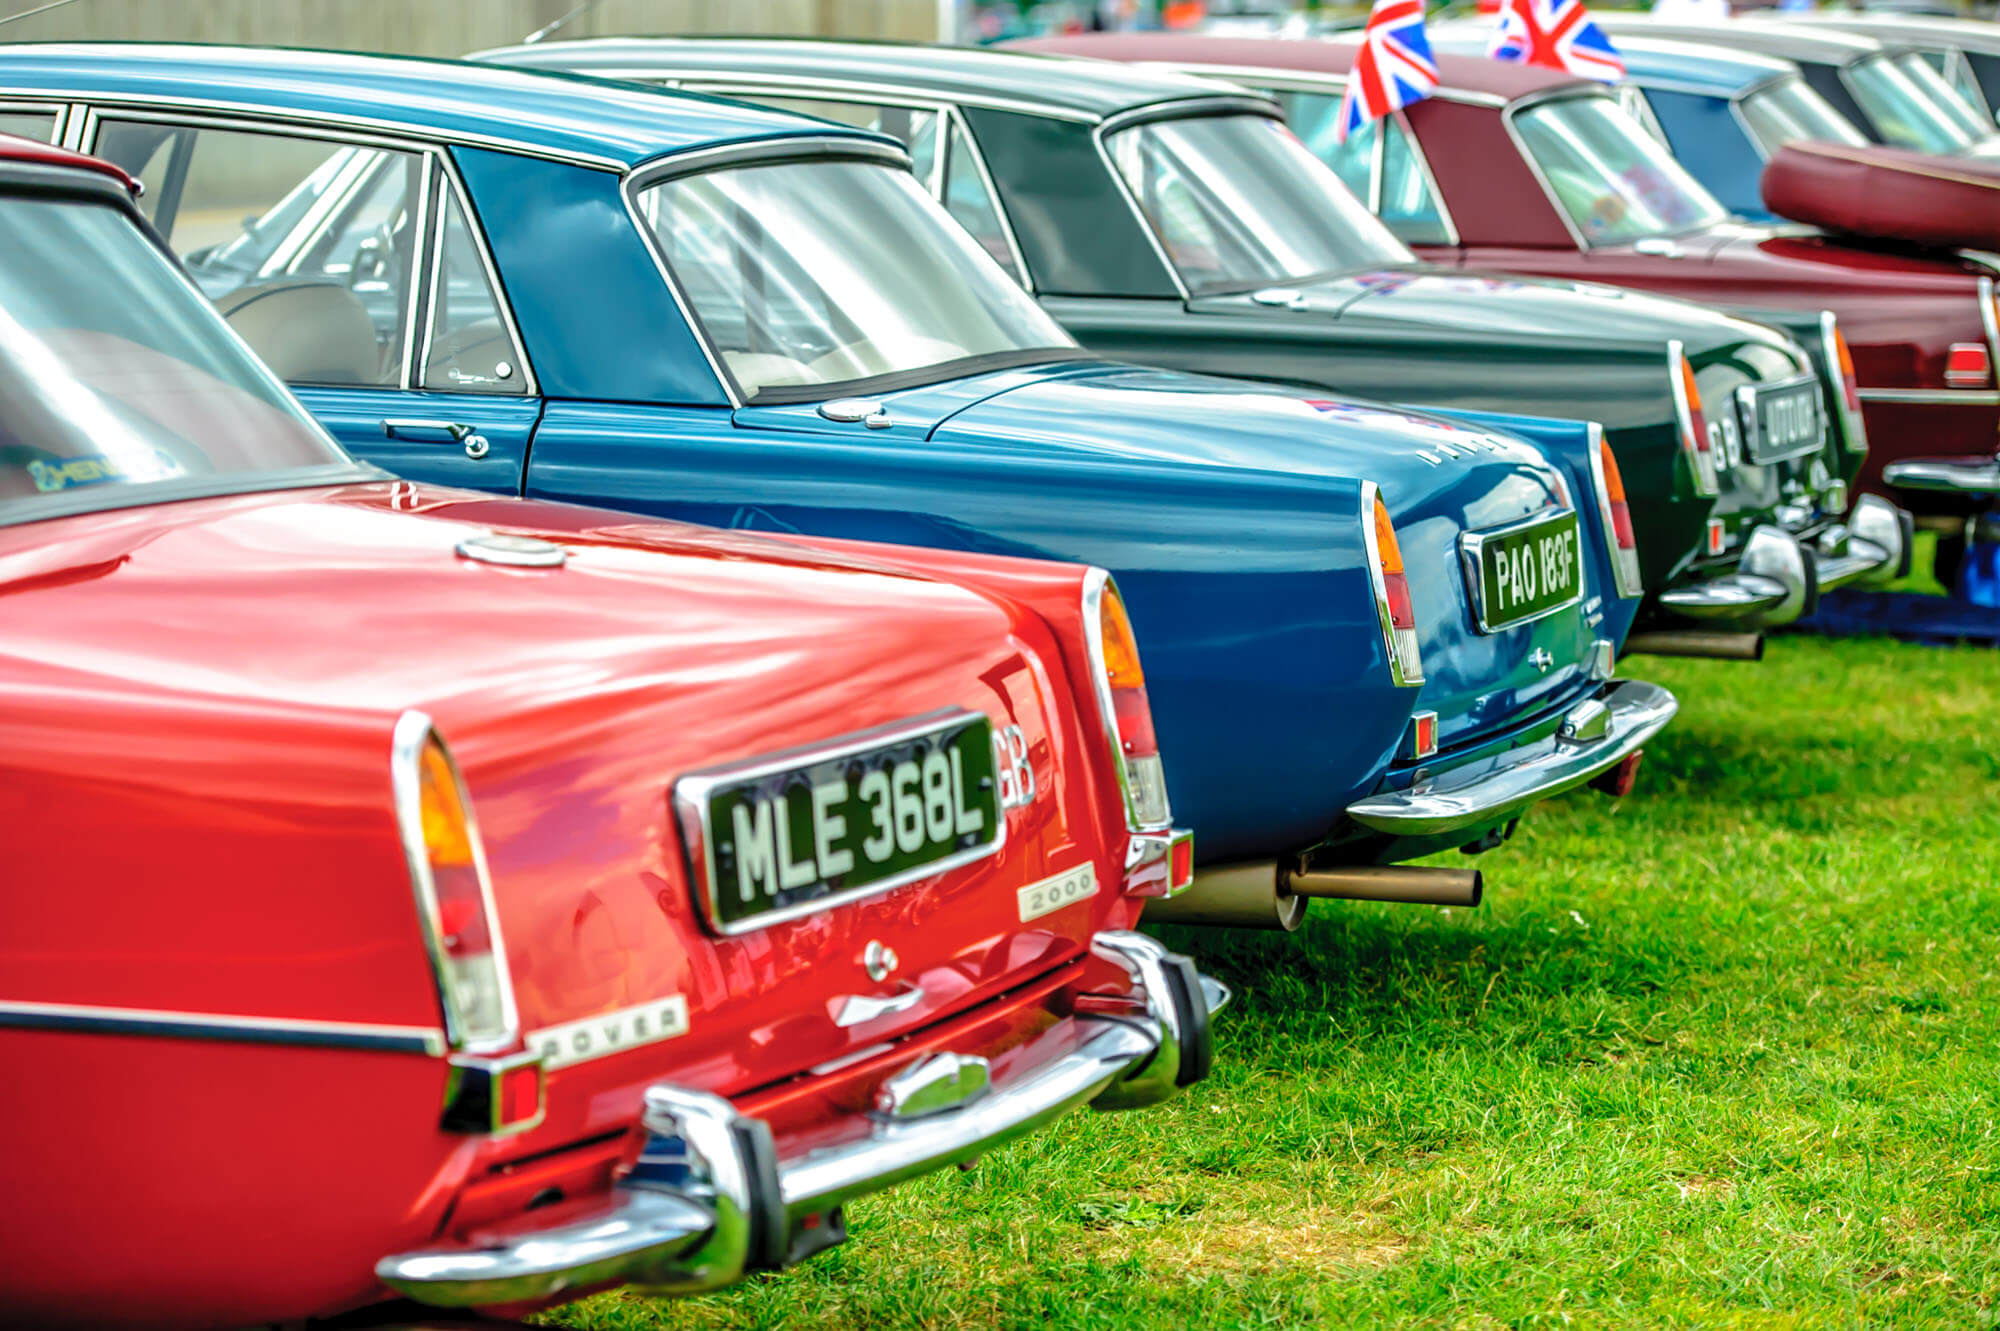 A line-up of brightly coloured classic cars on display as part of a Car Club at The Classic at Silverstone